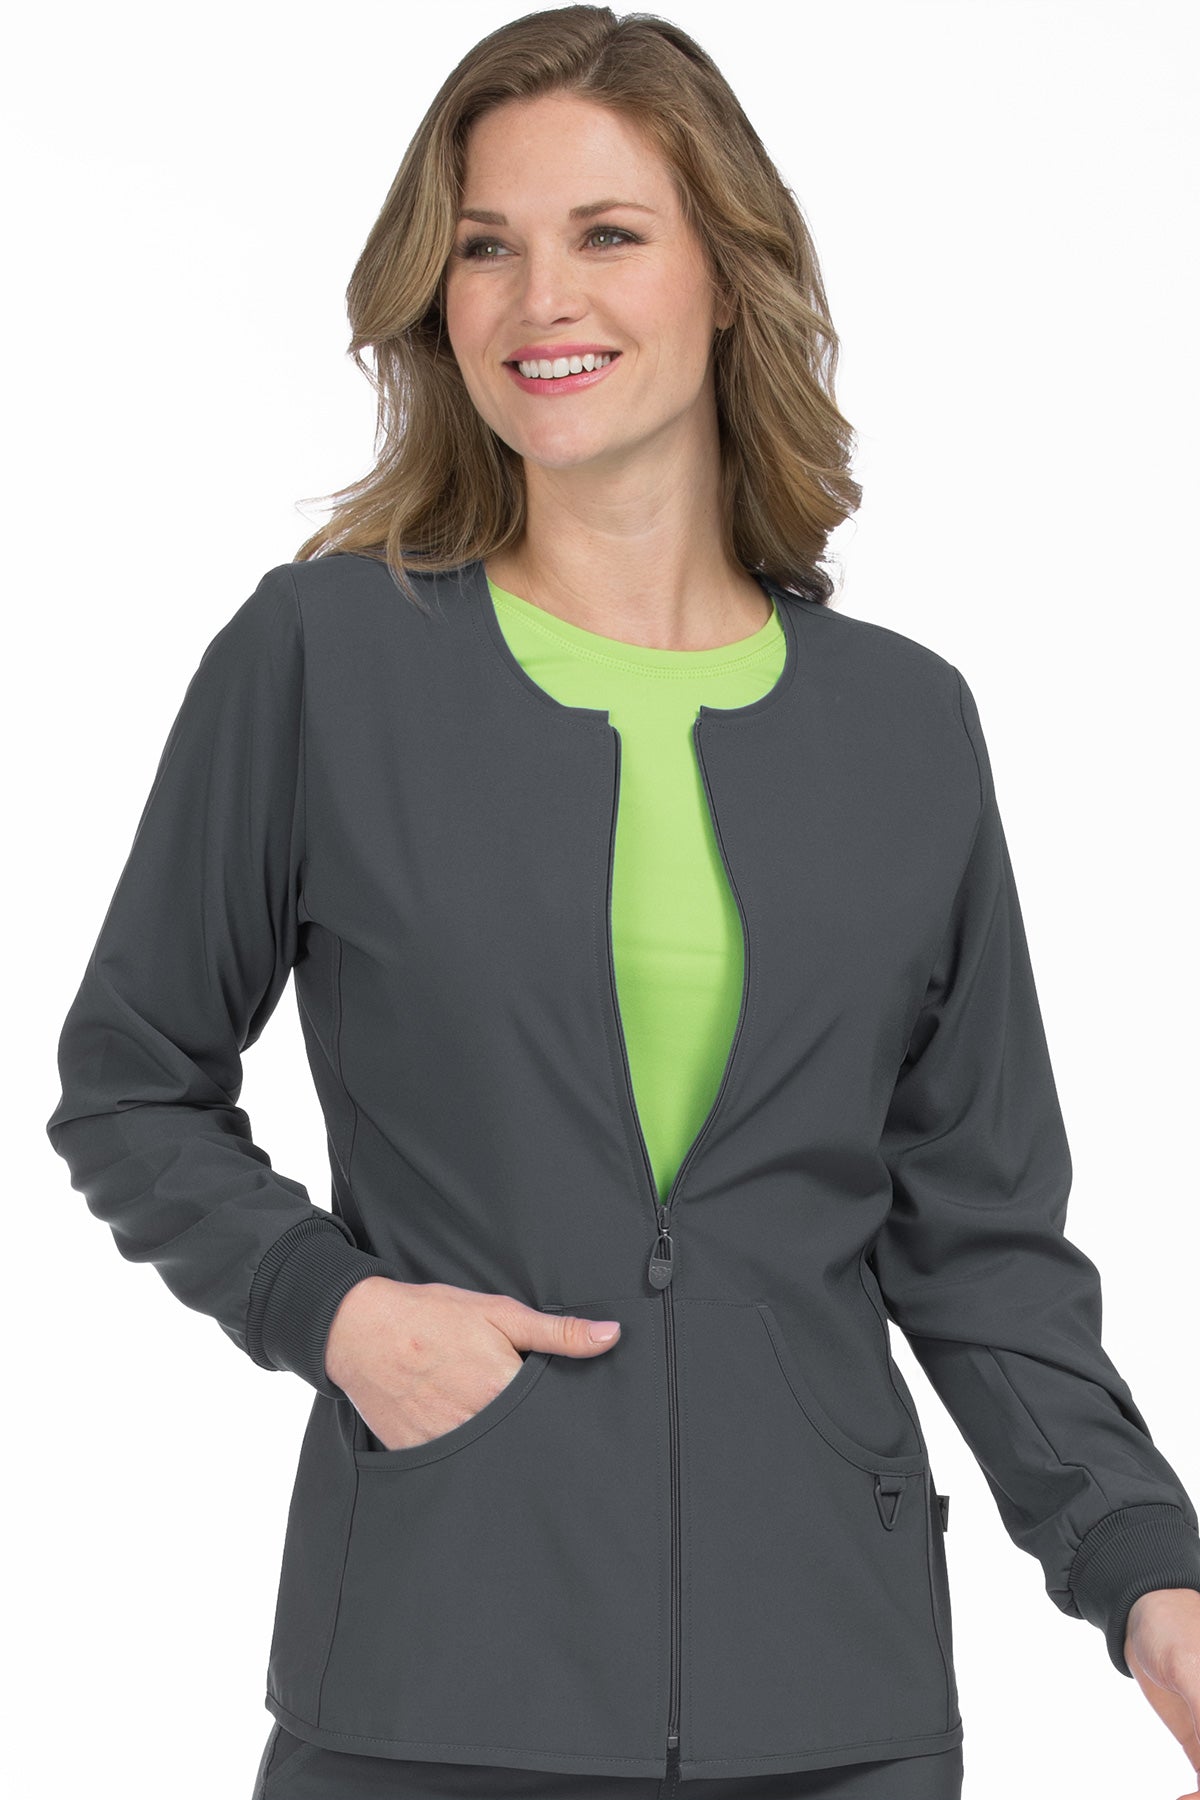 Med Couture Scrub Jacket Activate Warm Terrain Zip Front in Pewter at Parker's Clothing and Shoes.